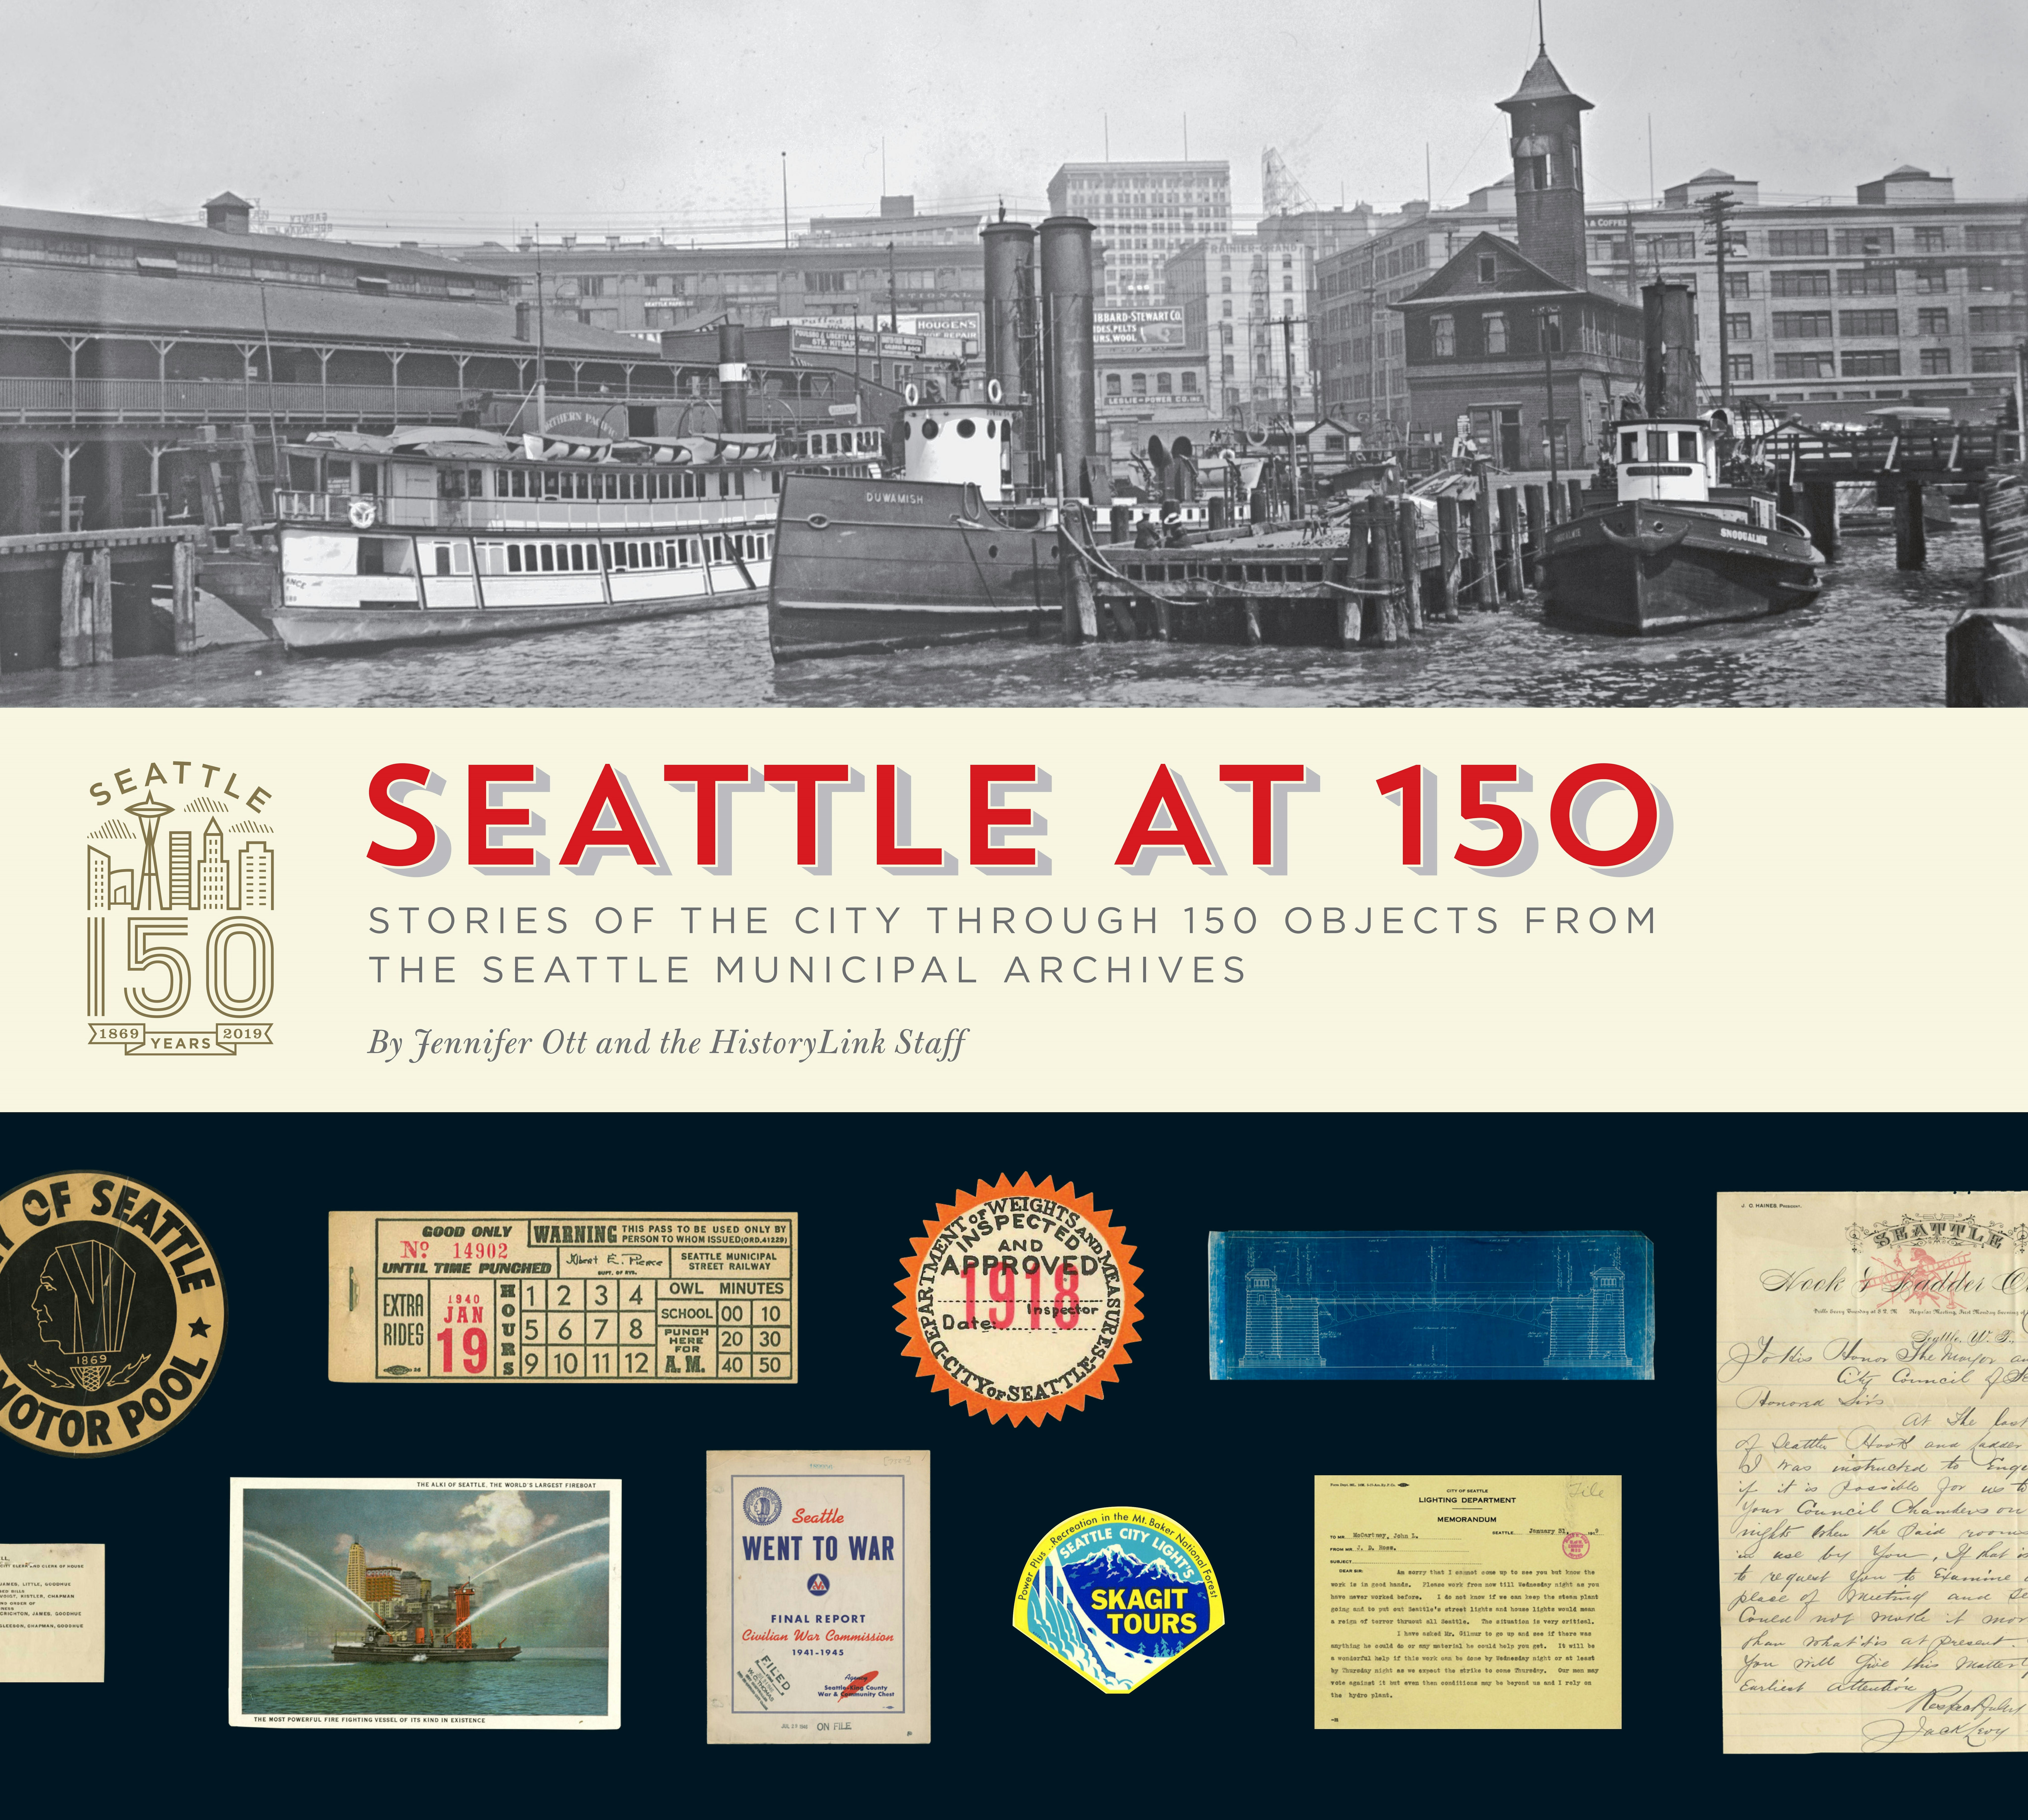 Seattle at 150